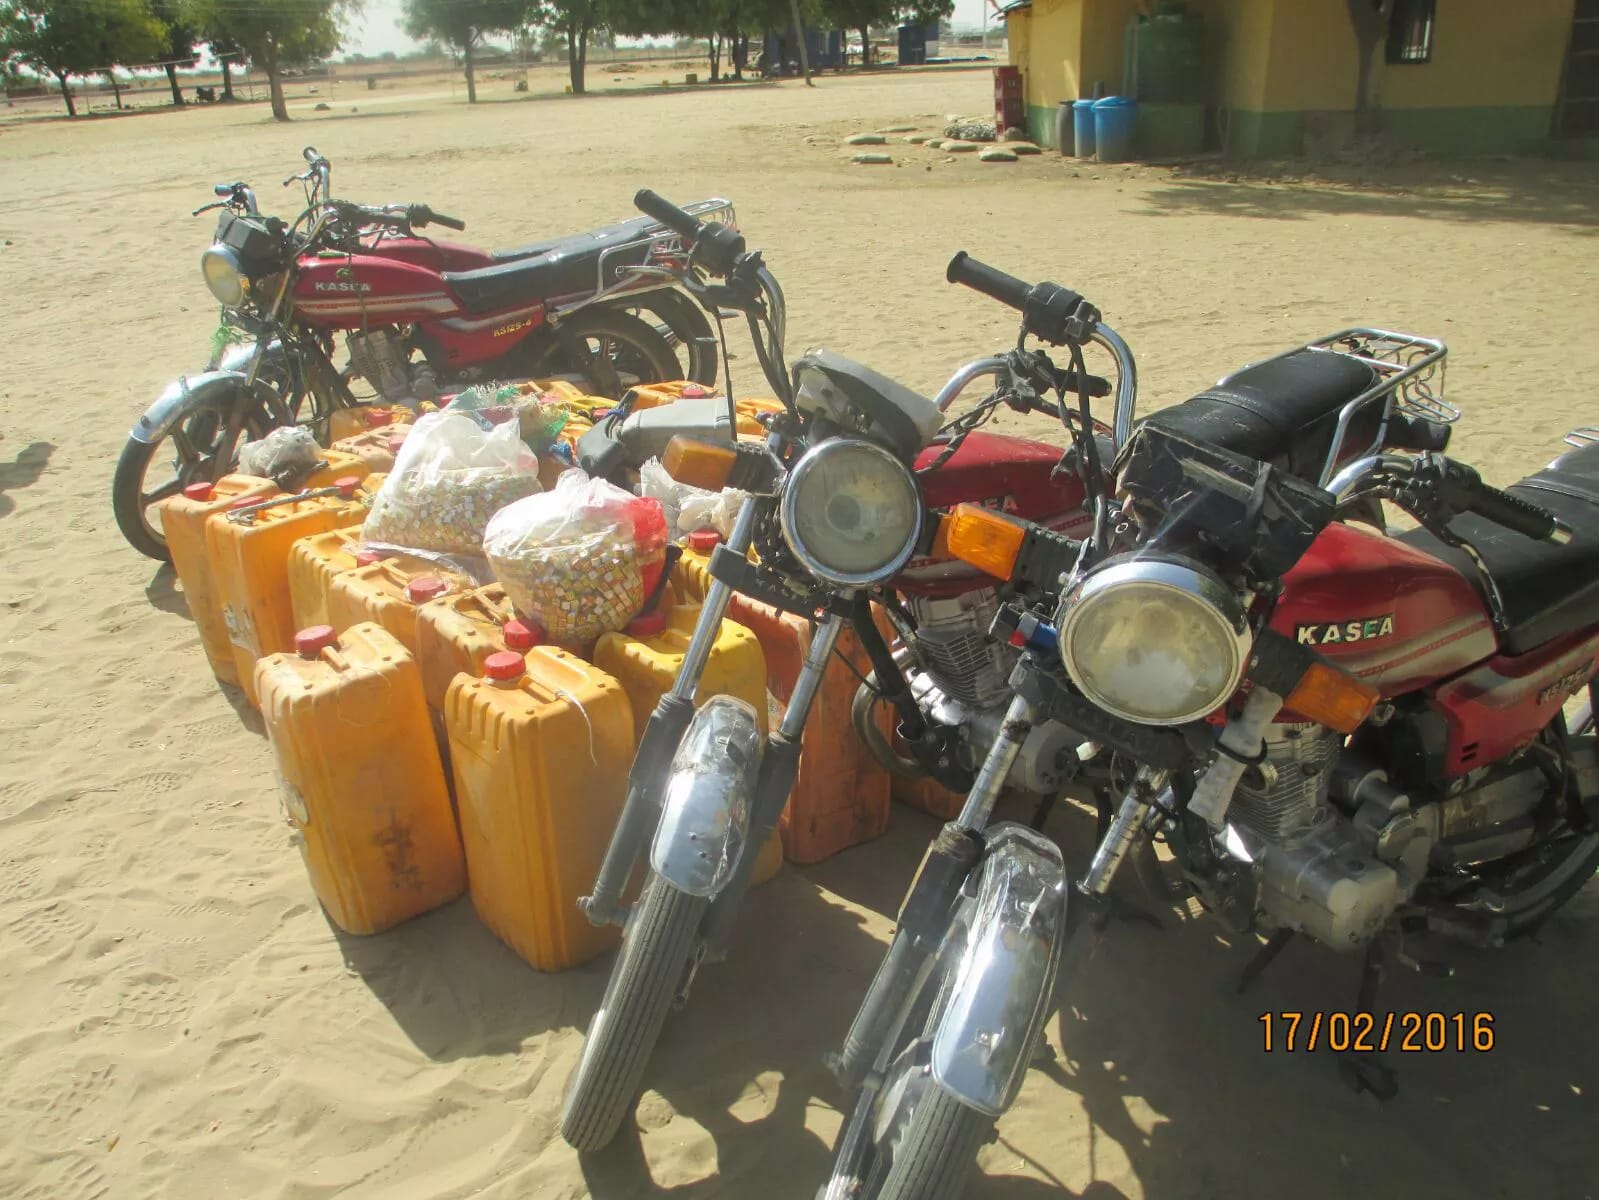 Motorcycles and gallons of fuel